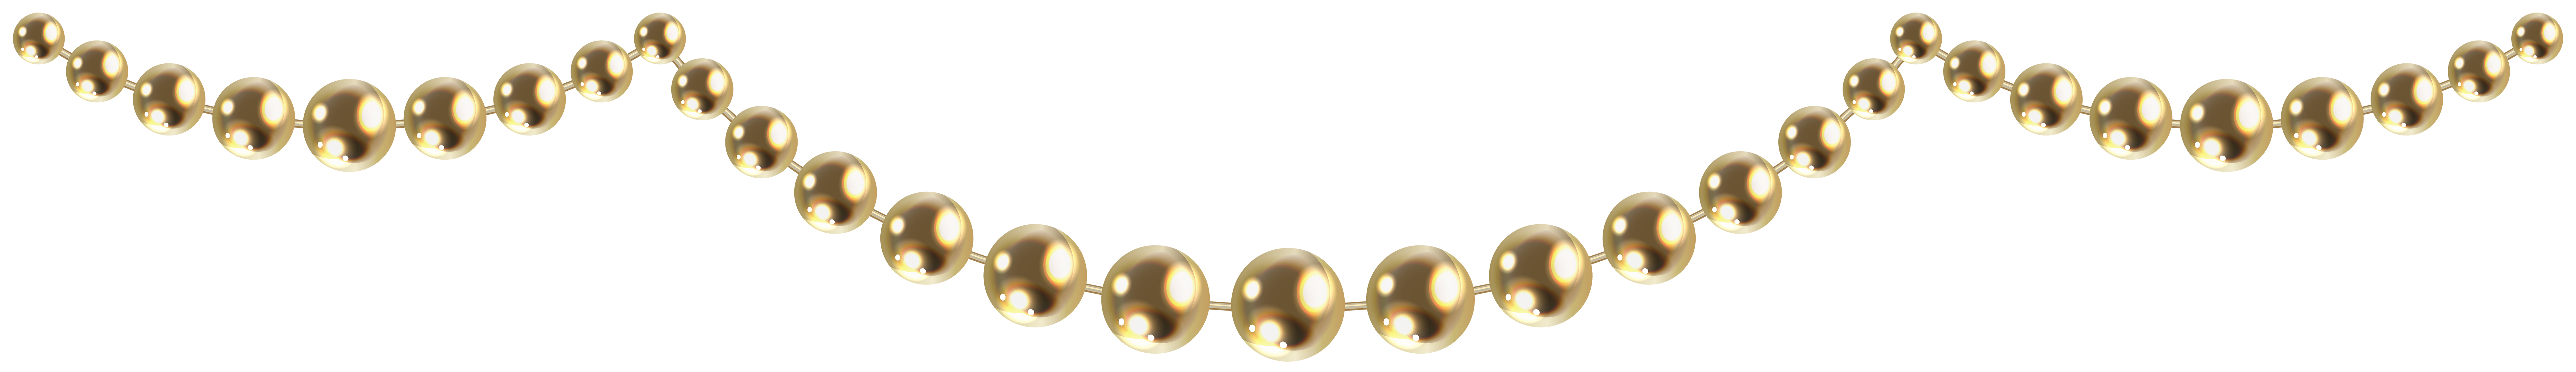 Beads PNG